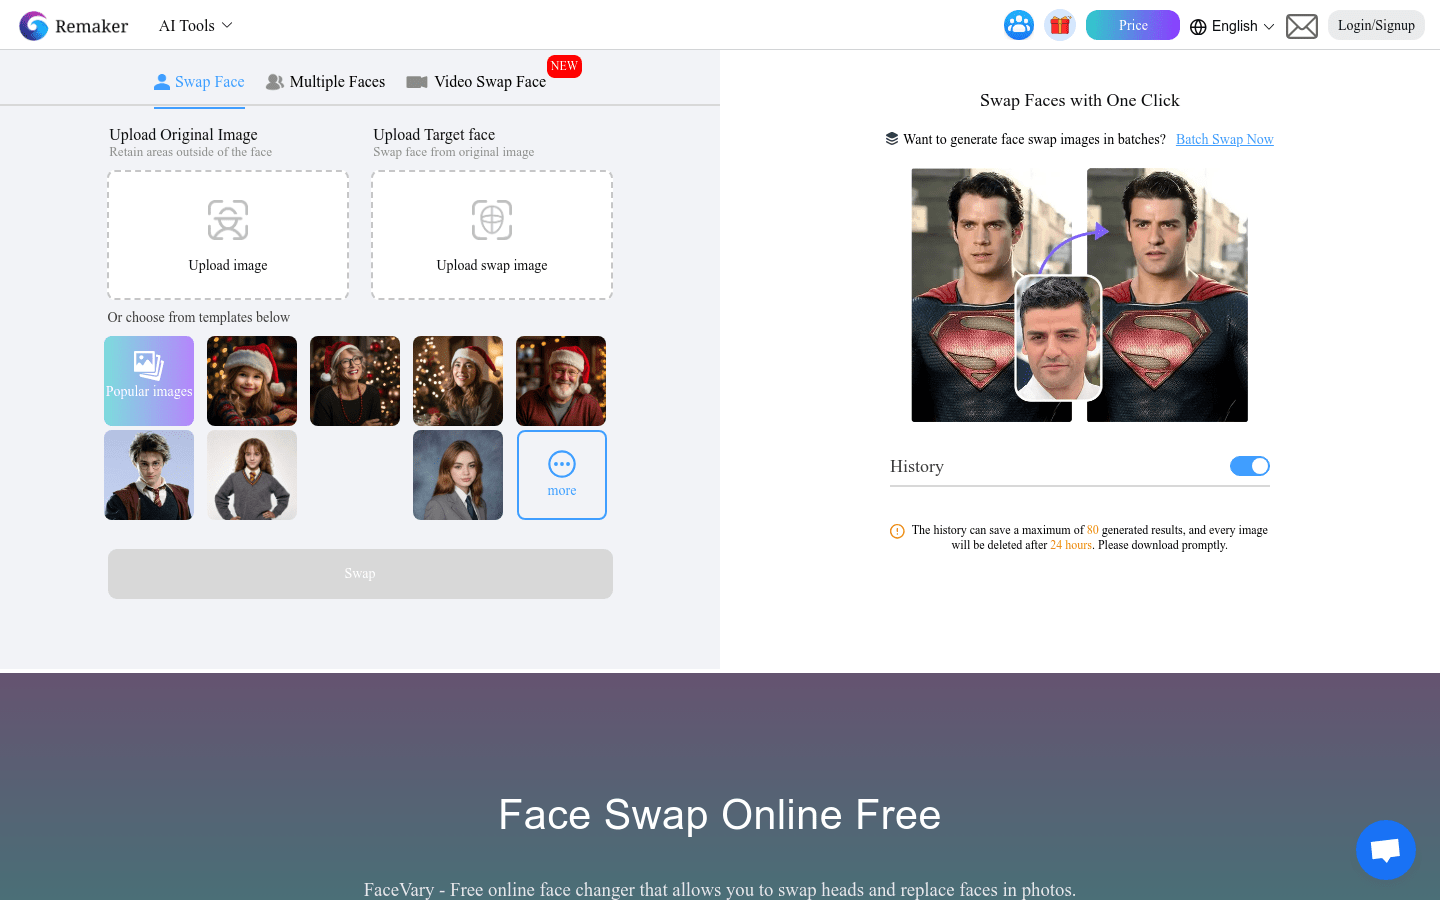 FaceVary Face Swap Online Free